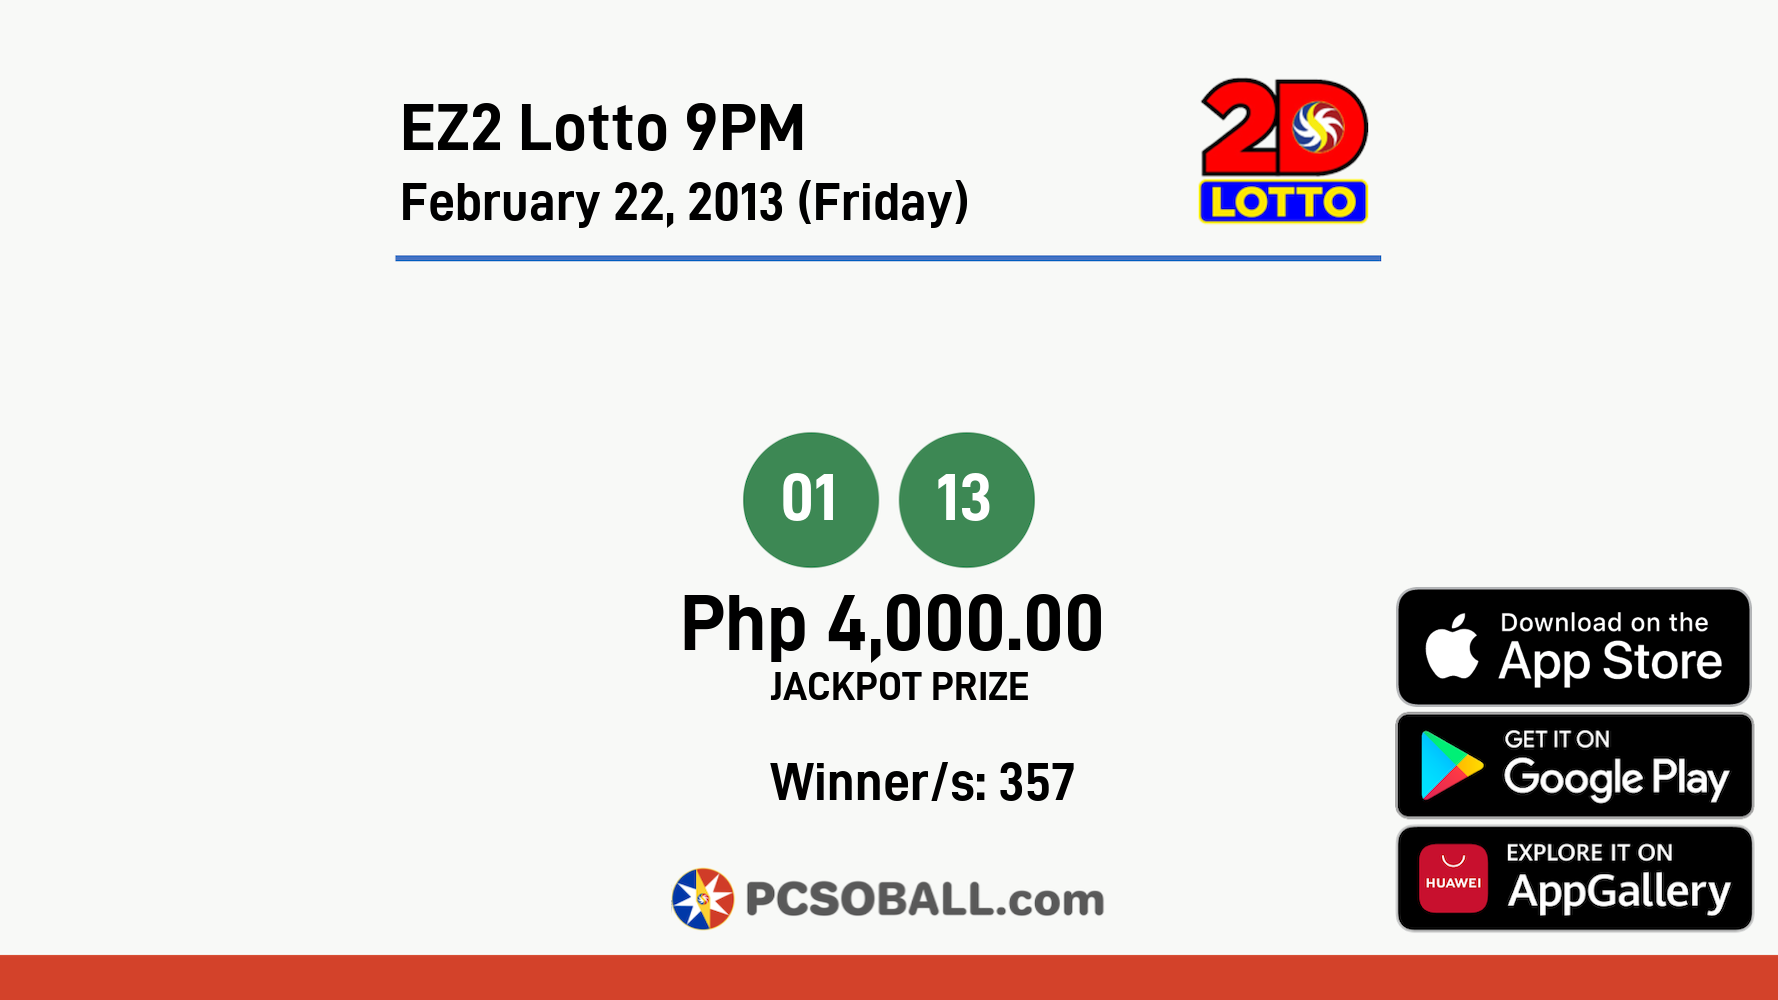 EZ2 Lotto 9PM February 22, 2013 (Friday) Result